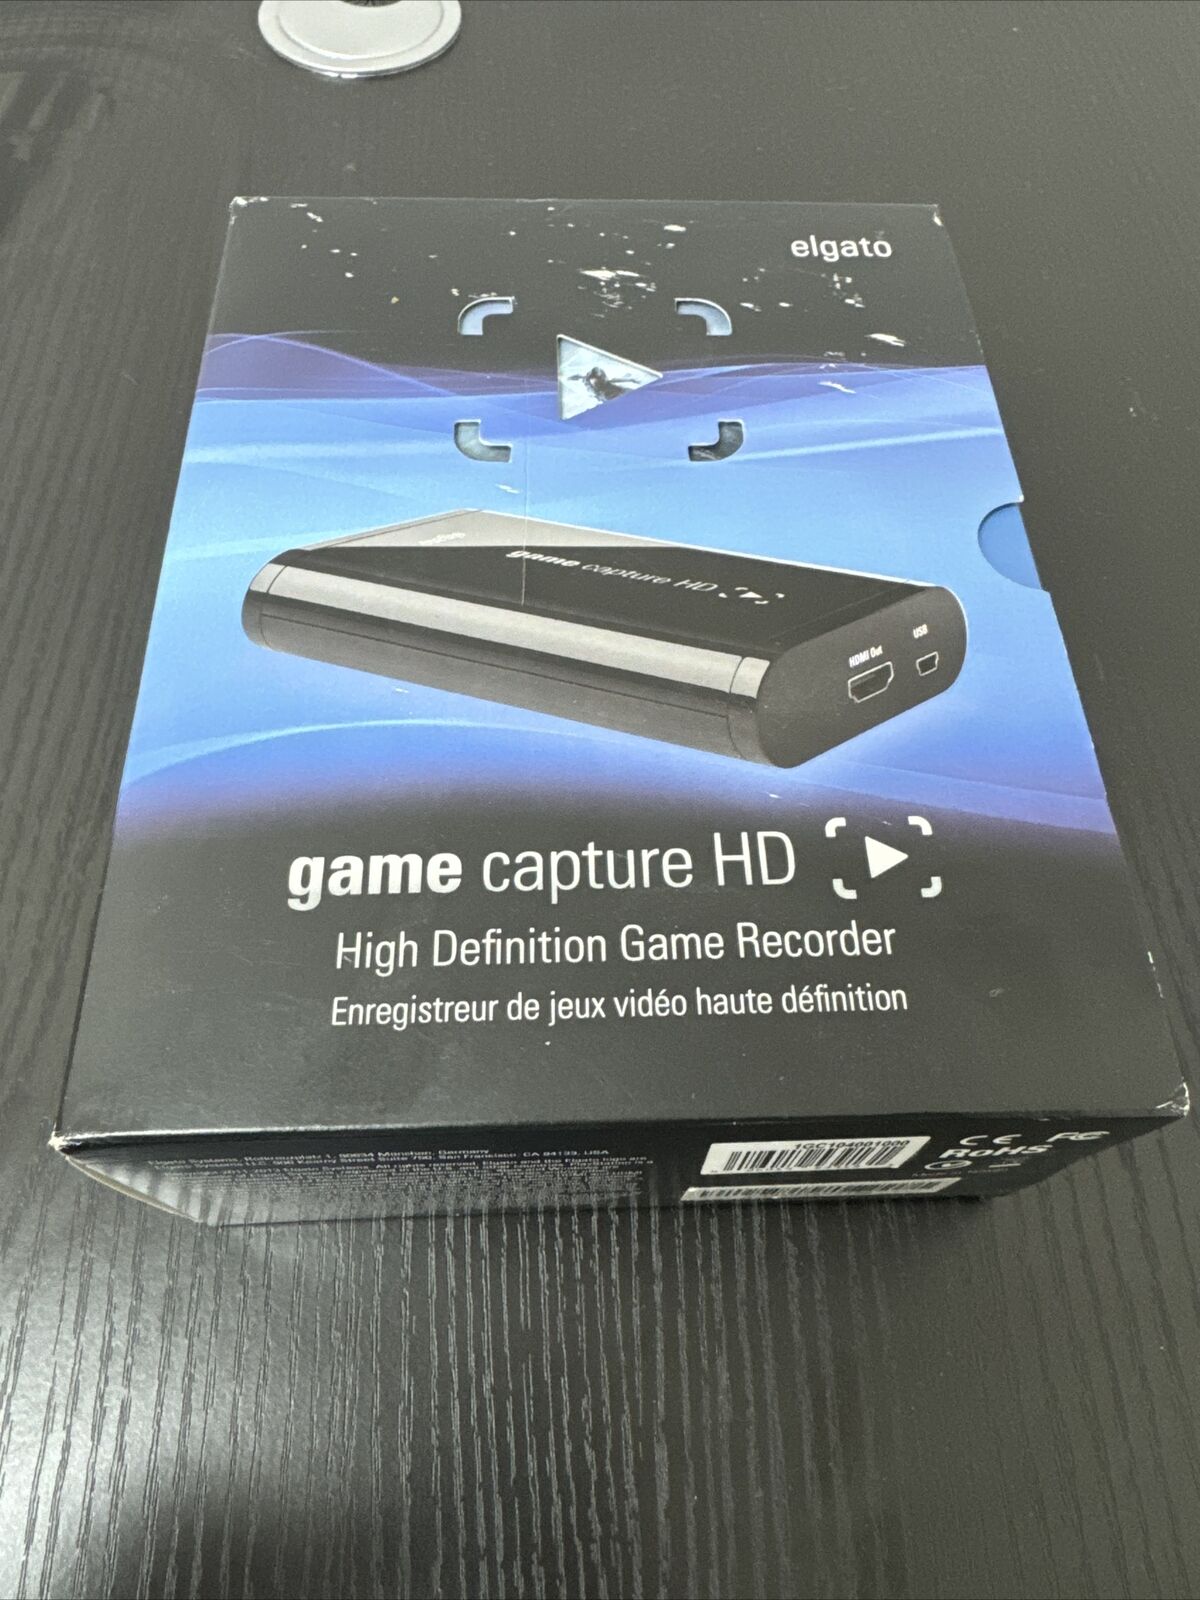 Elgato Game Capture HD High Definition Game Recorder - 10025010